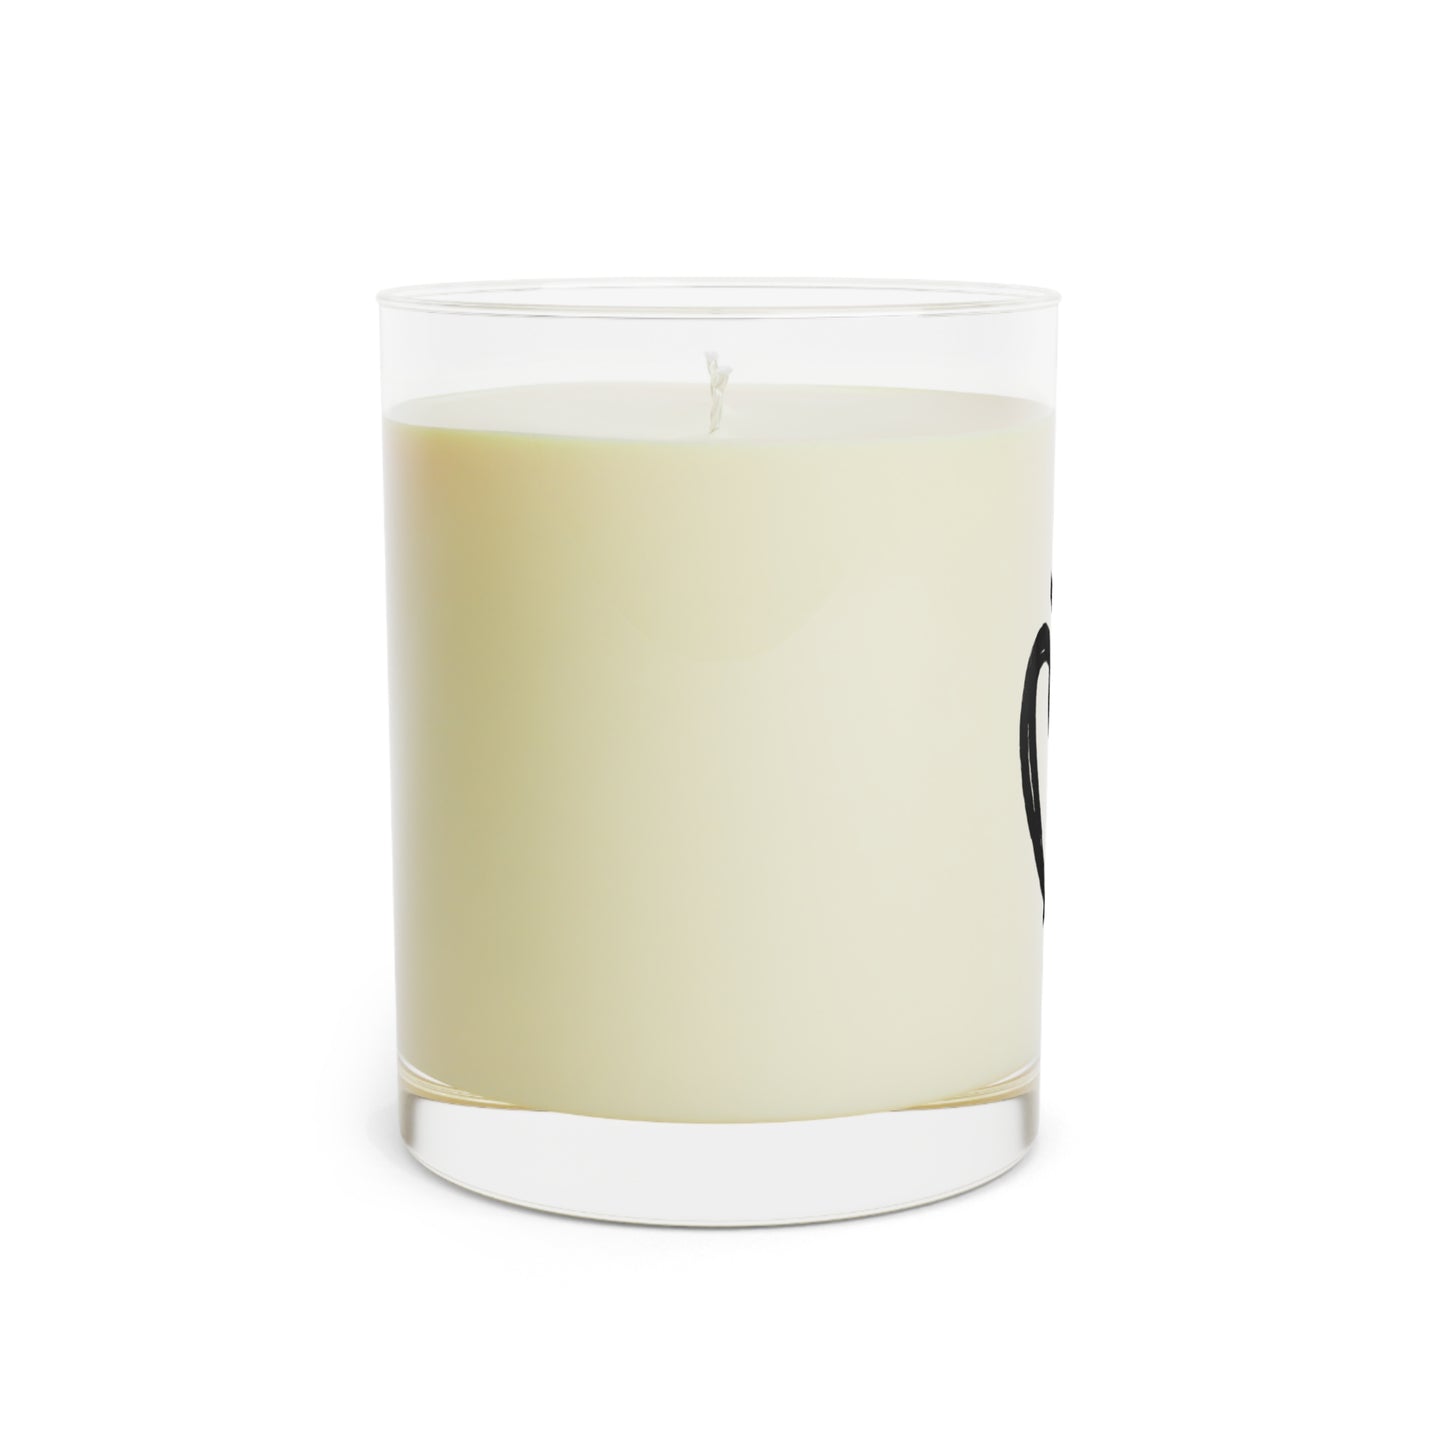 Heart Cross Scented Candle - Full Glass, 11oz